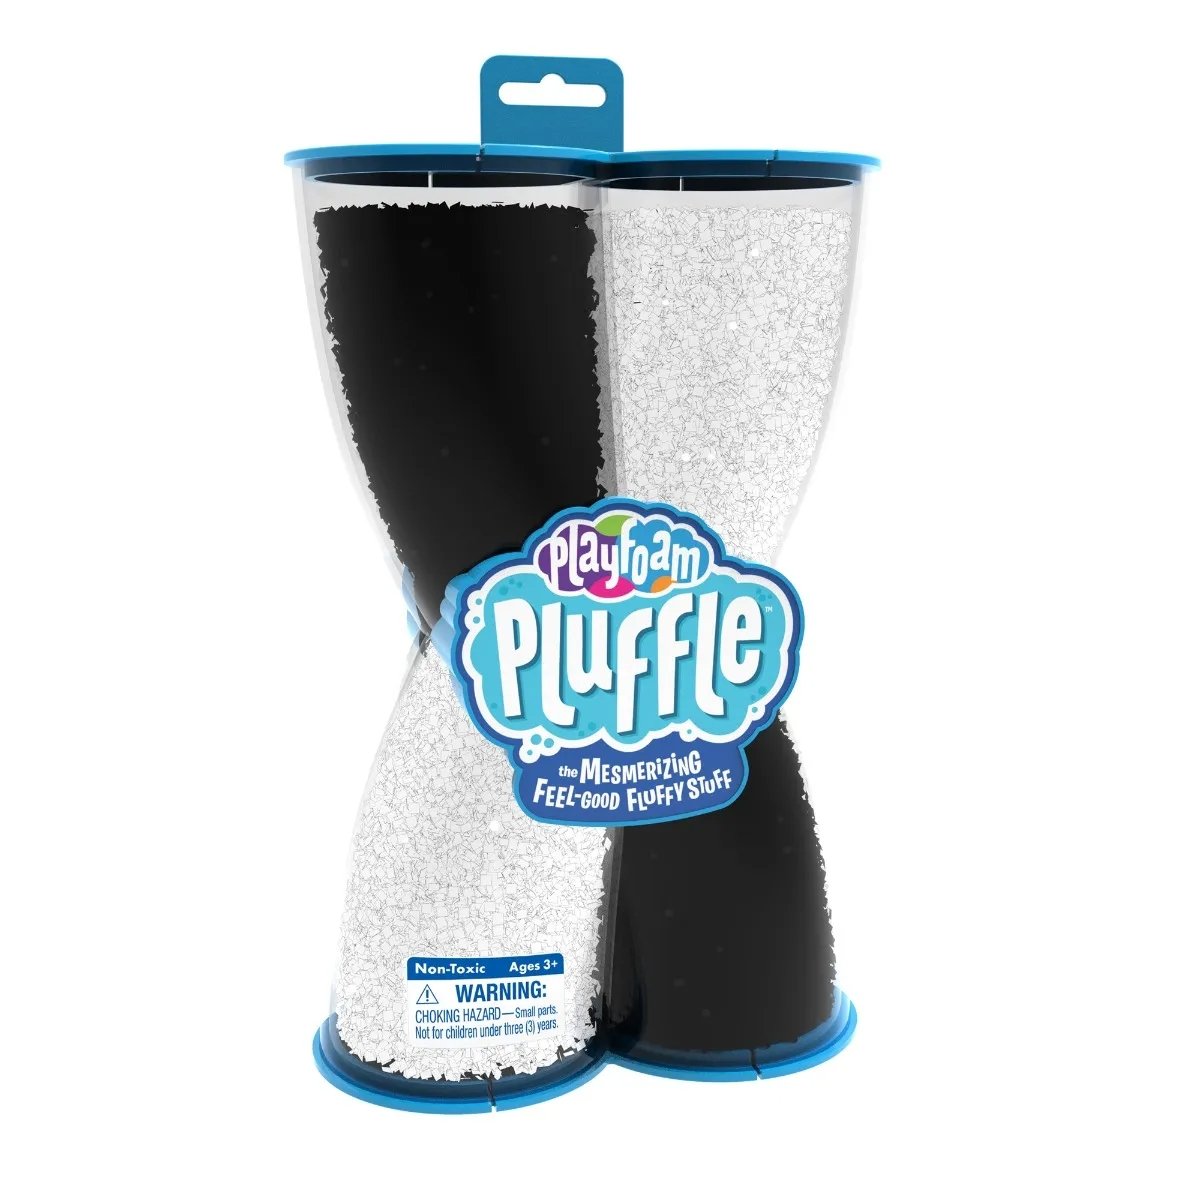 Playfoam Pluffle Twist Black & White, Playfoam Pluffle™ Twist Black & White is the mesmerising feelgood fluffy stuff that’s perfect for tactile learning and creative play. Flip the new sturdy, twisted resealable packaging design, and pour out eye-catching Playfoam Pluffle. Then grab it with both hands, give it a squish, watch the satisfying, mesmerising, lava-like flowing action. Ideal for creative and tactile play, Playfoam Pluffle Twist Black & White is the mesmerising, feelgood fluffy stuff Ideal for tac